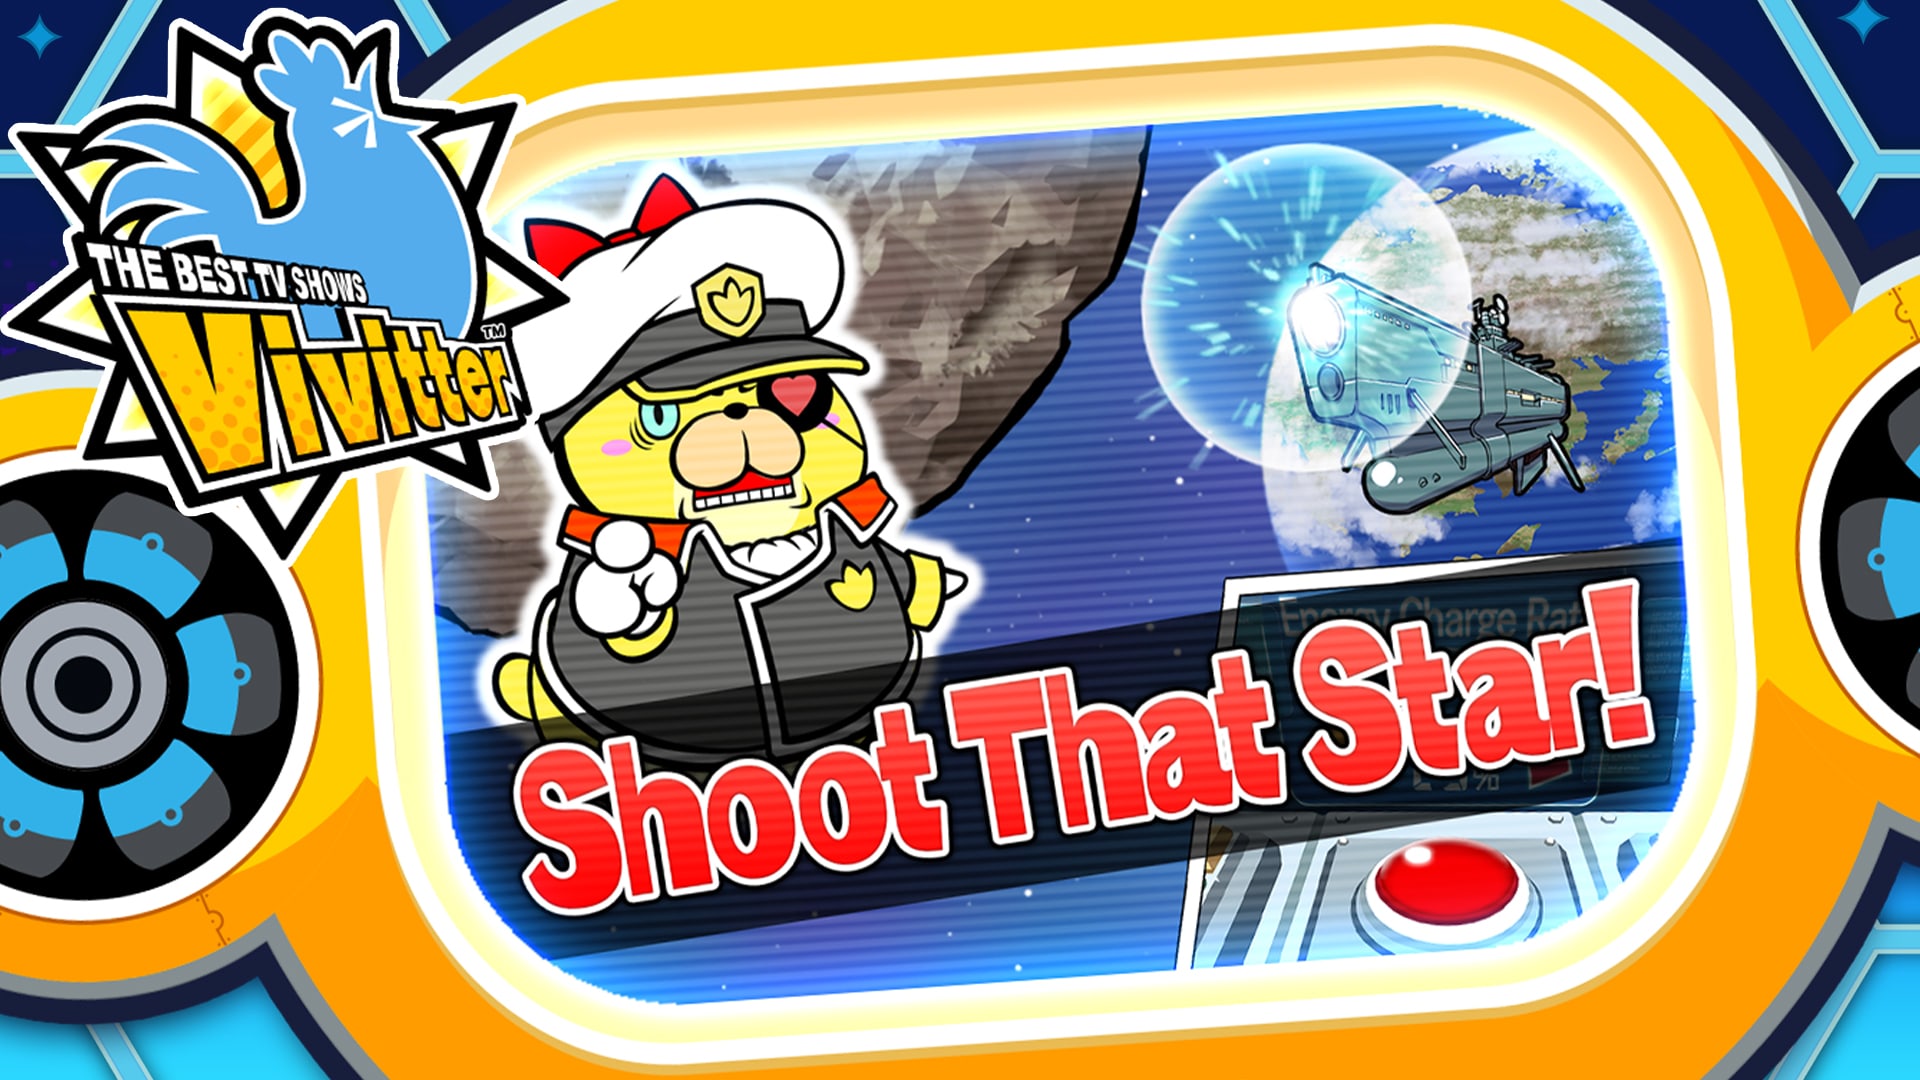 Additional mini-game "Shoot That Star!"